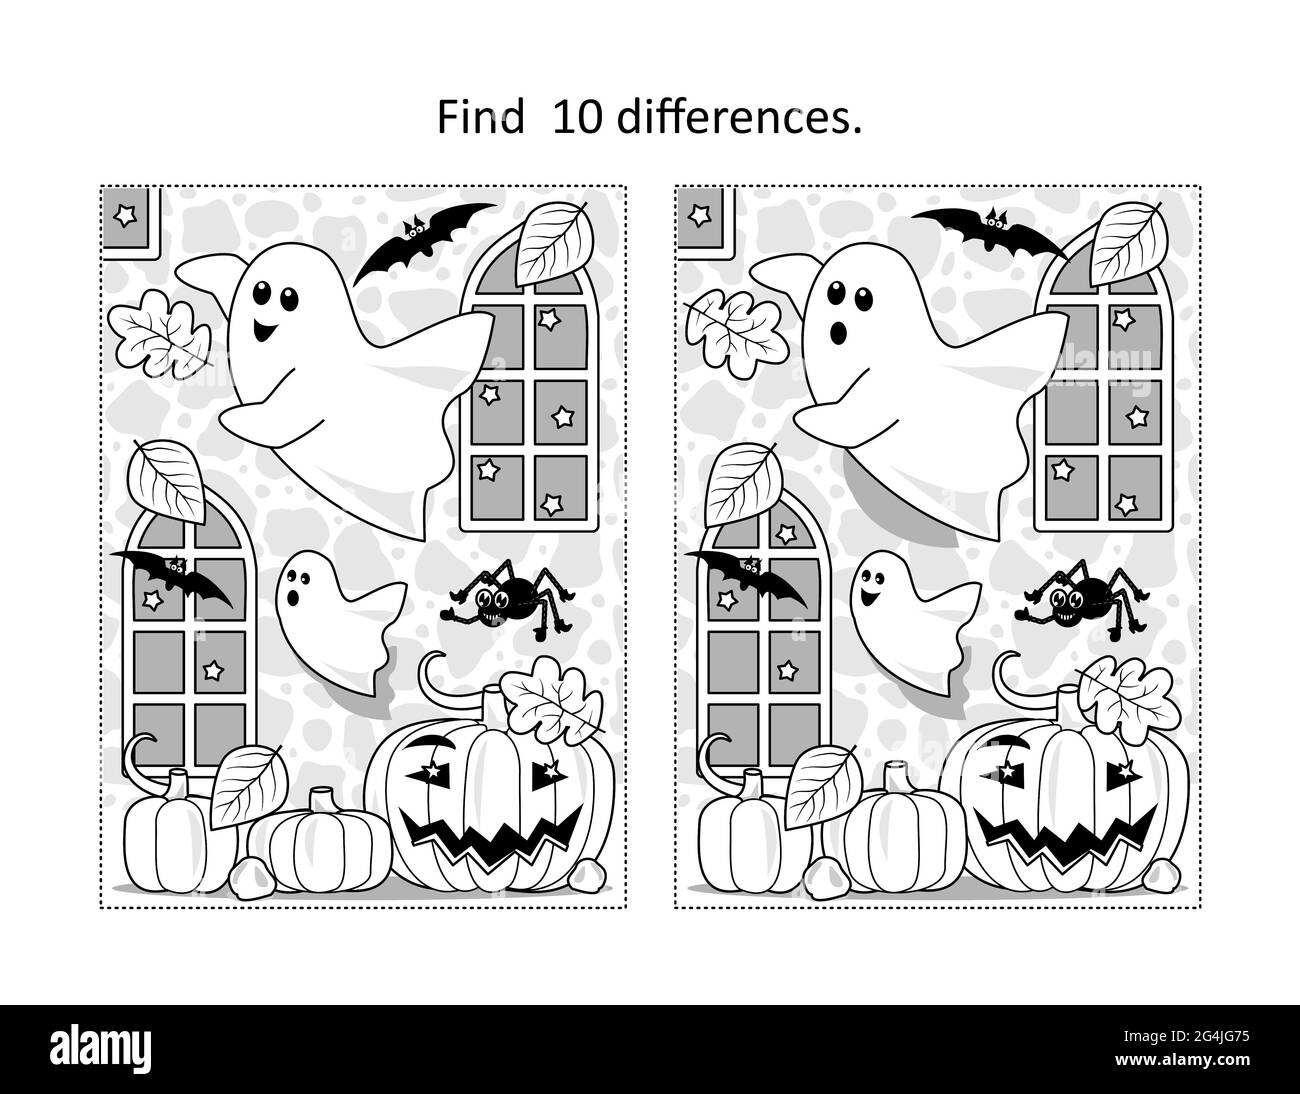 Find 10 differences visual puzzle and coloring page with Halloween ghosts playing in old castle interior Stock Photo